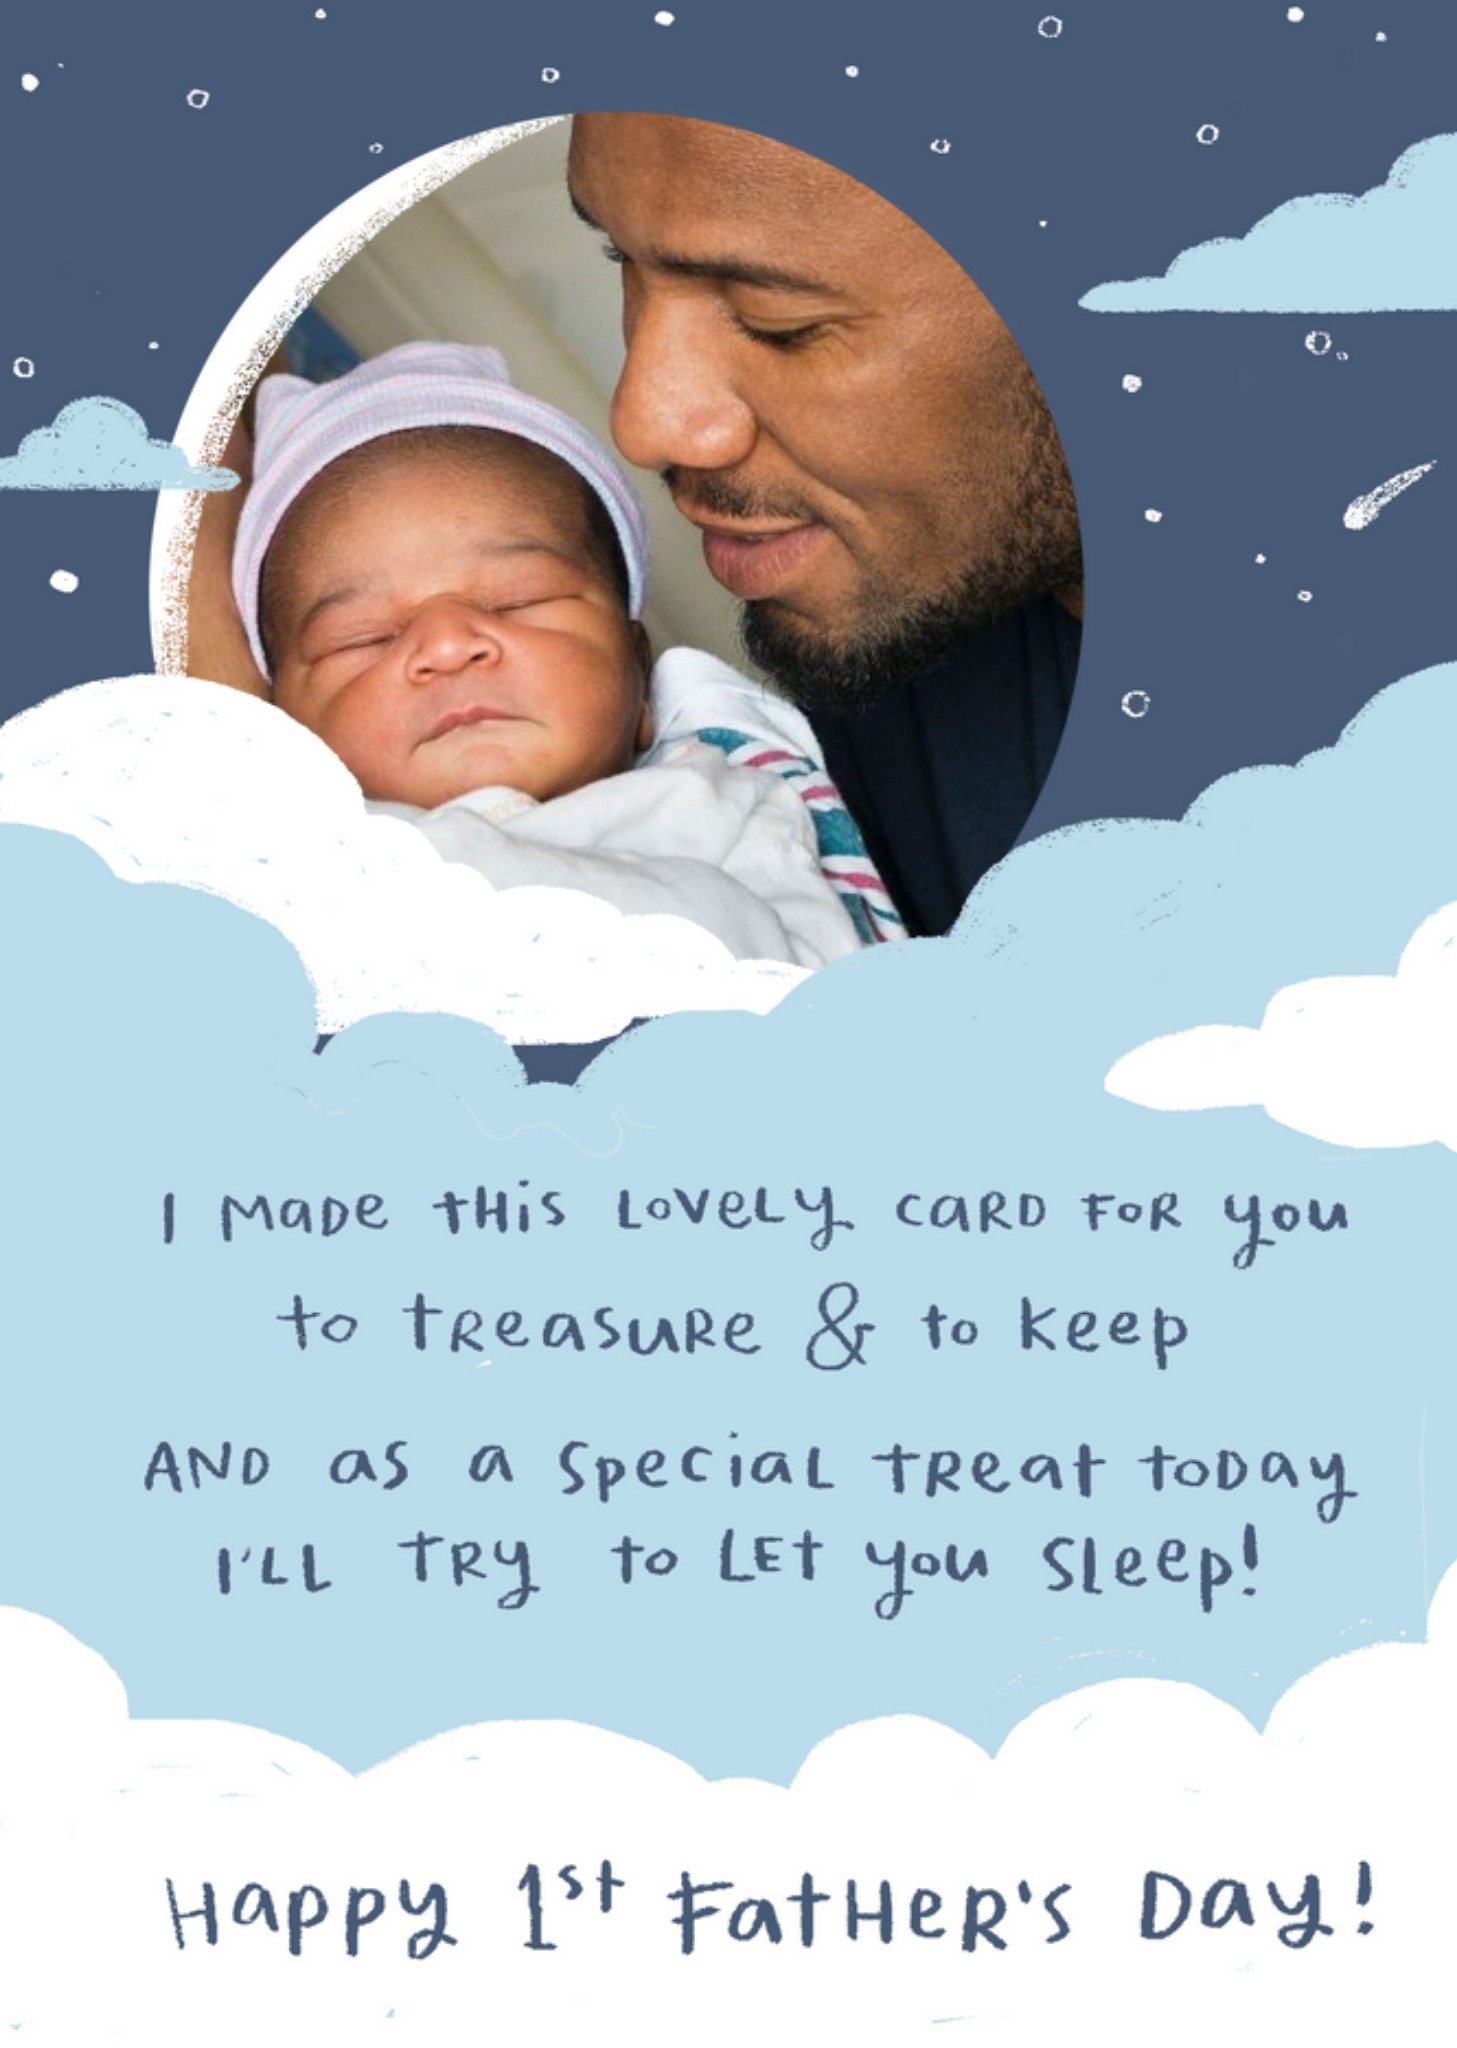 Moonpig First Fathers Day Sentimental And Funny Photo Upload Card To Treasure, Large